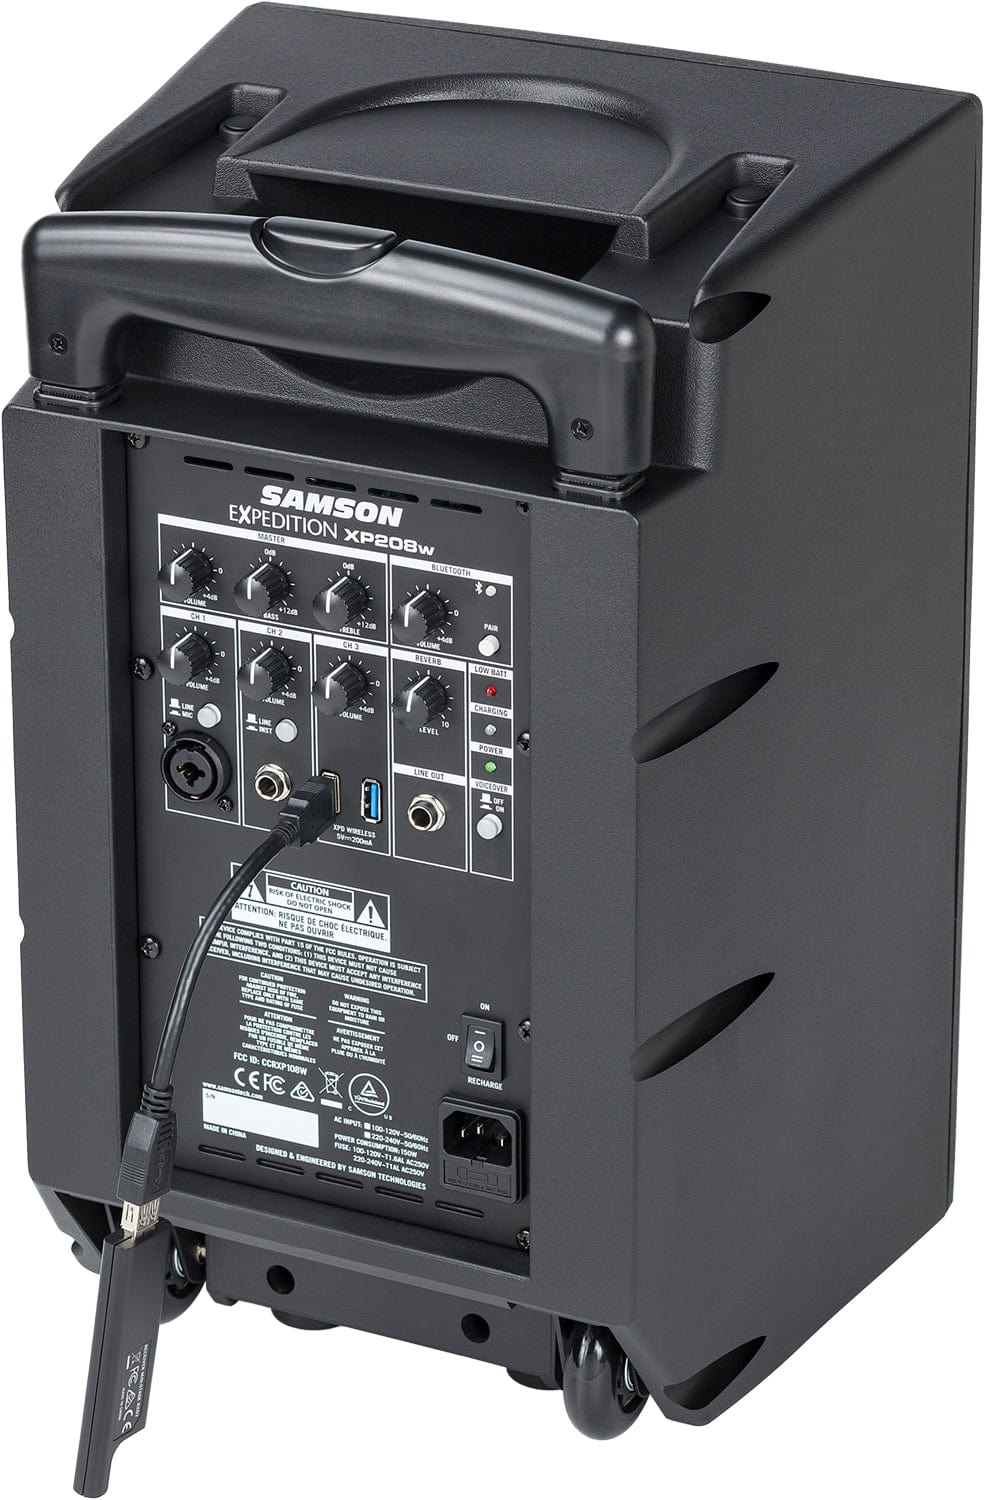 Samson SAXP208W Portable PA 200-Watts 2-Way 8-Inch Woofer w/ Bluetooth and Wireless HH Mic - PSSL ProSound and Stage Lighting